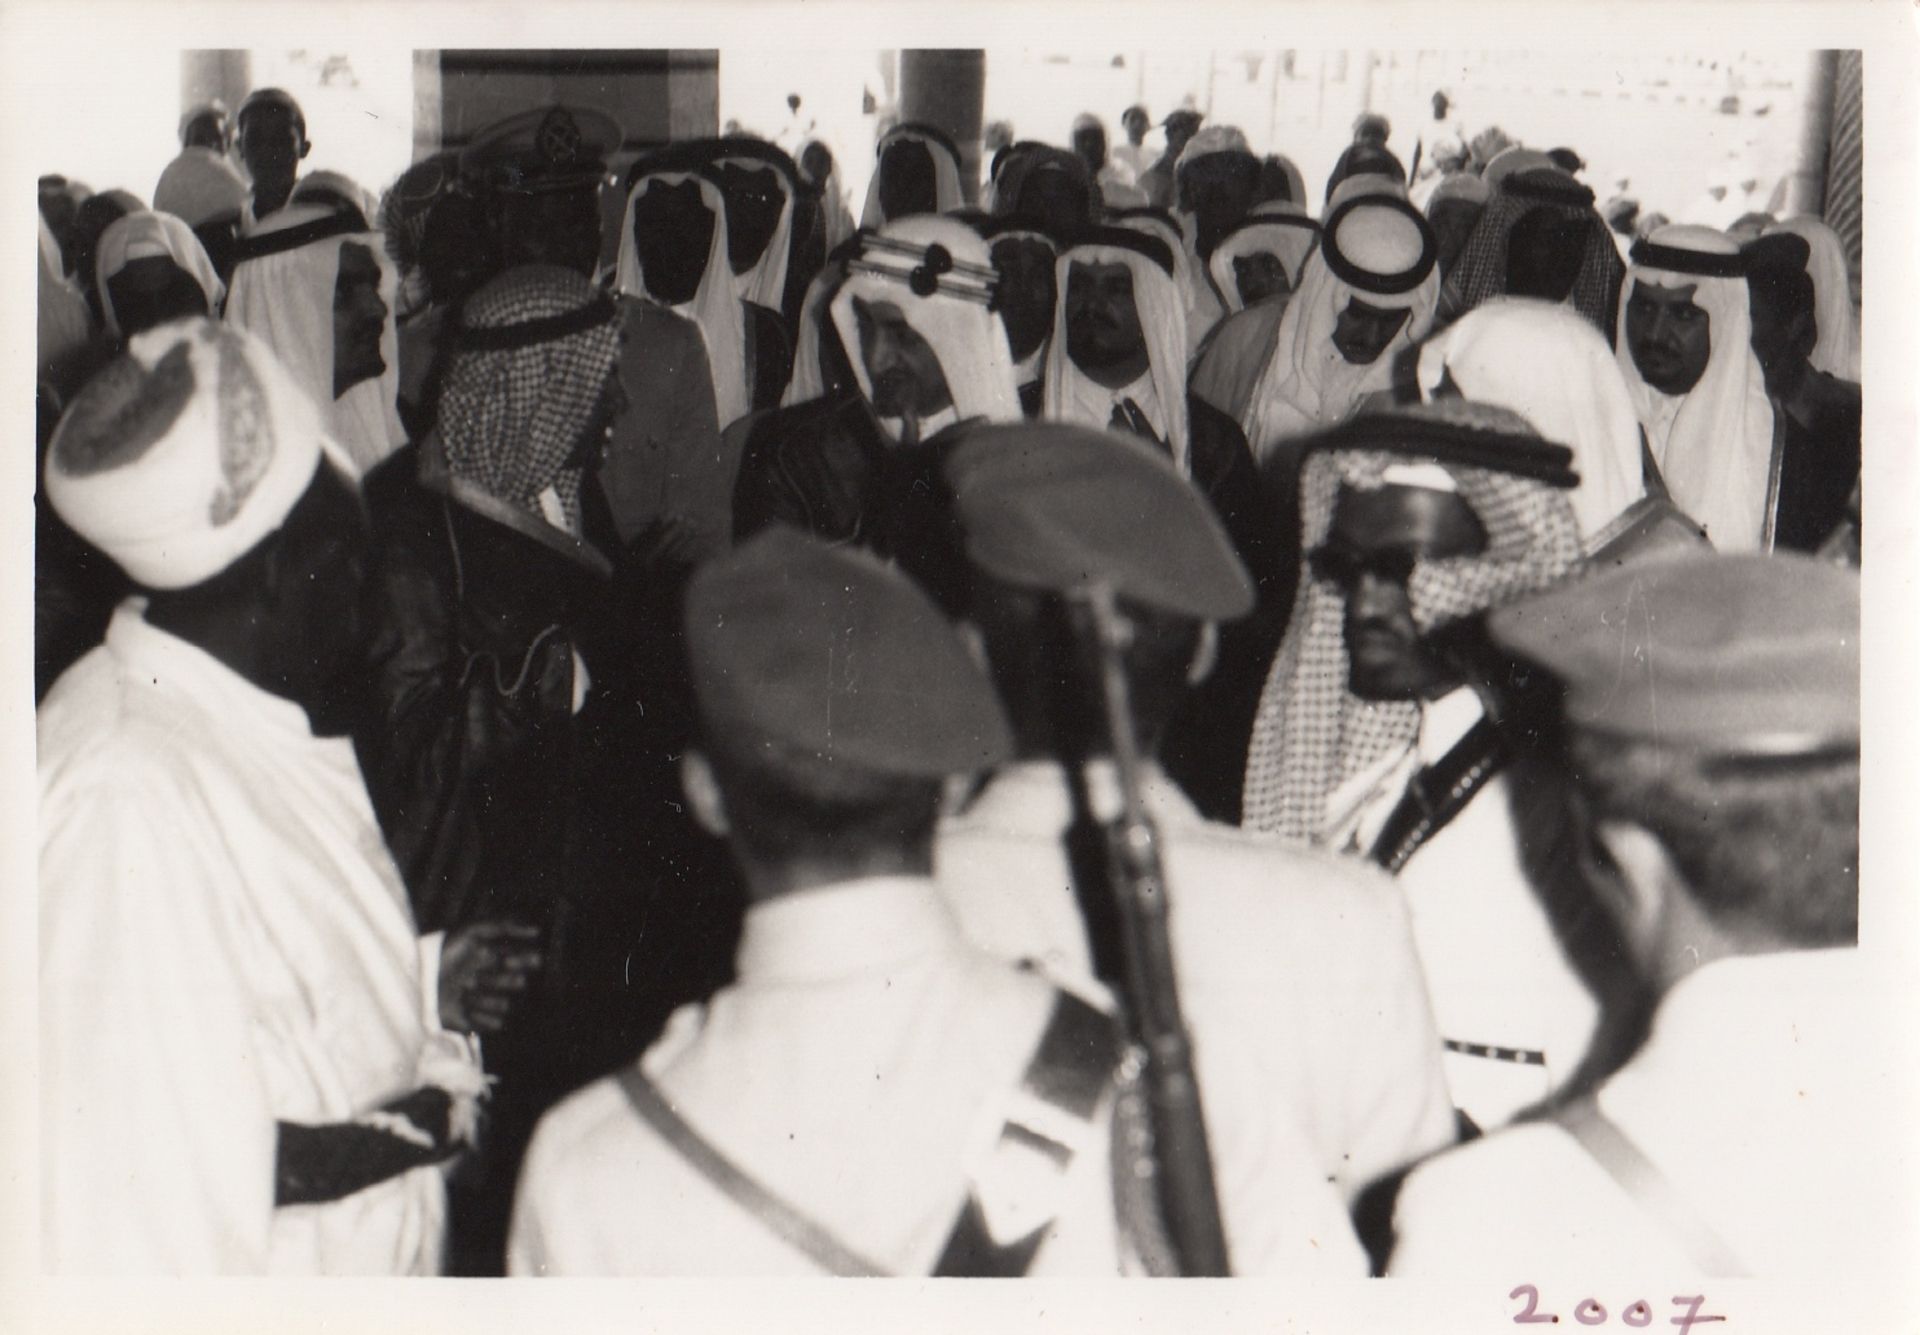 A COLLECTION OF PHOTOGRAPHS OF HIS MAJESTY KING FAISAL BIN ABDUL AZIZ VISITING THE GRAND MOSQUES OF - Image 19 of 24